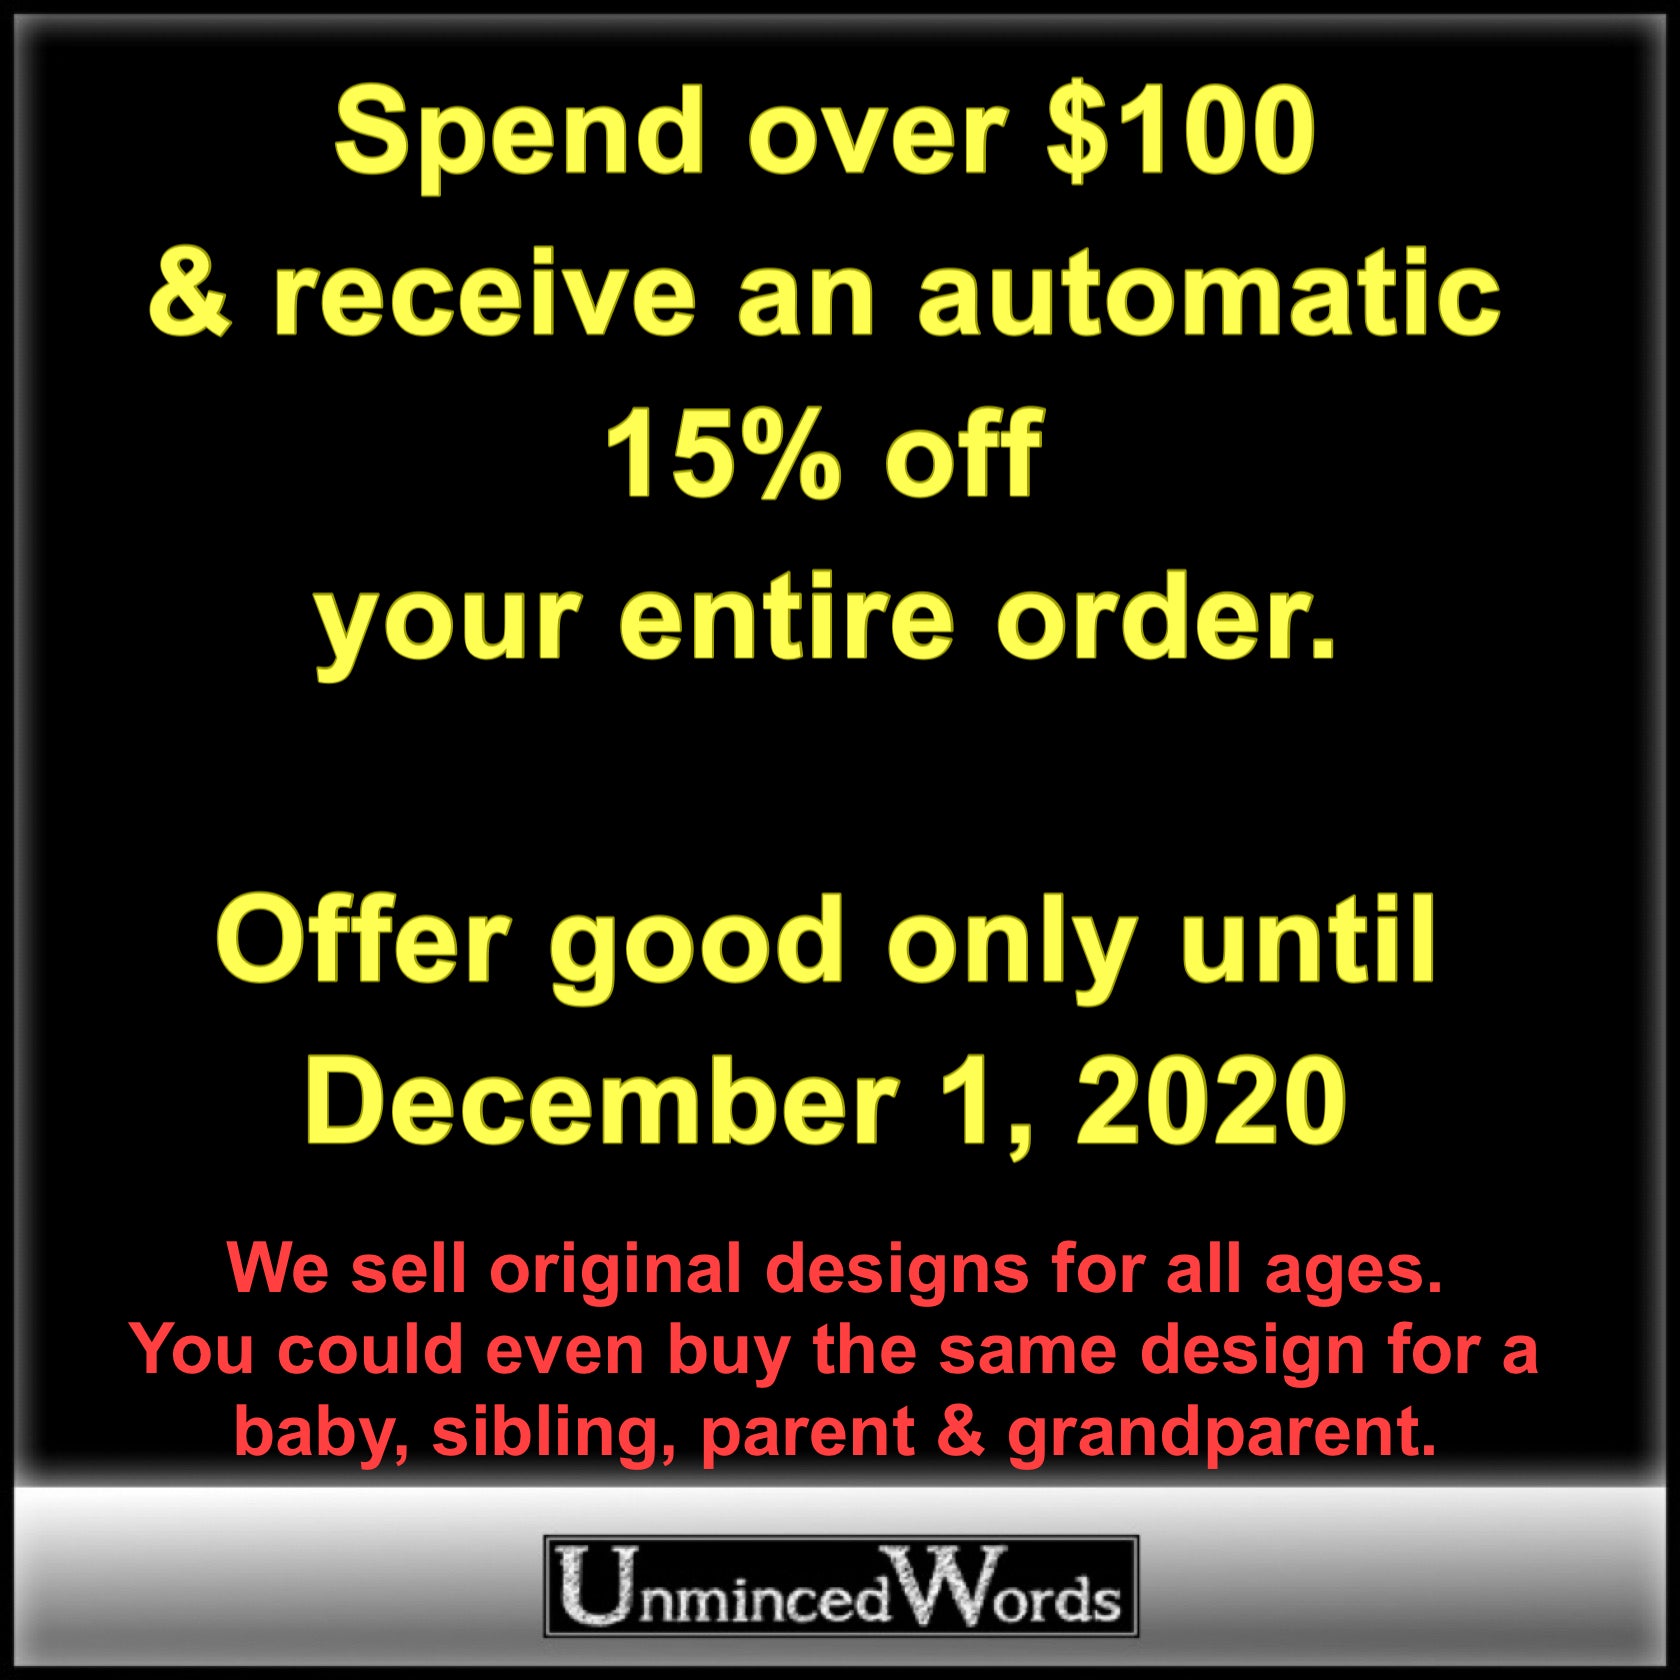 Spend over $100 & receive an automatic 15% off entire order. UnmincedWords.com Offer good only until December 1, 2020.